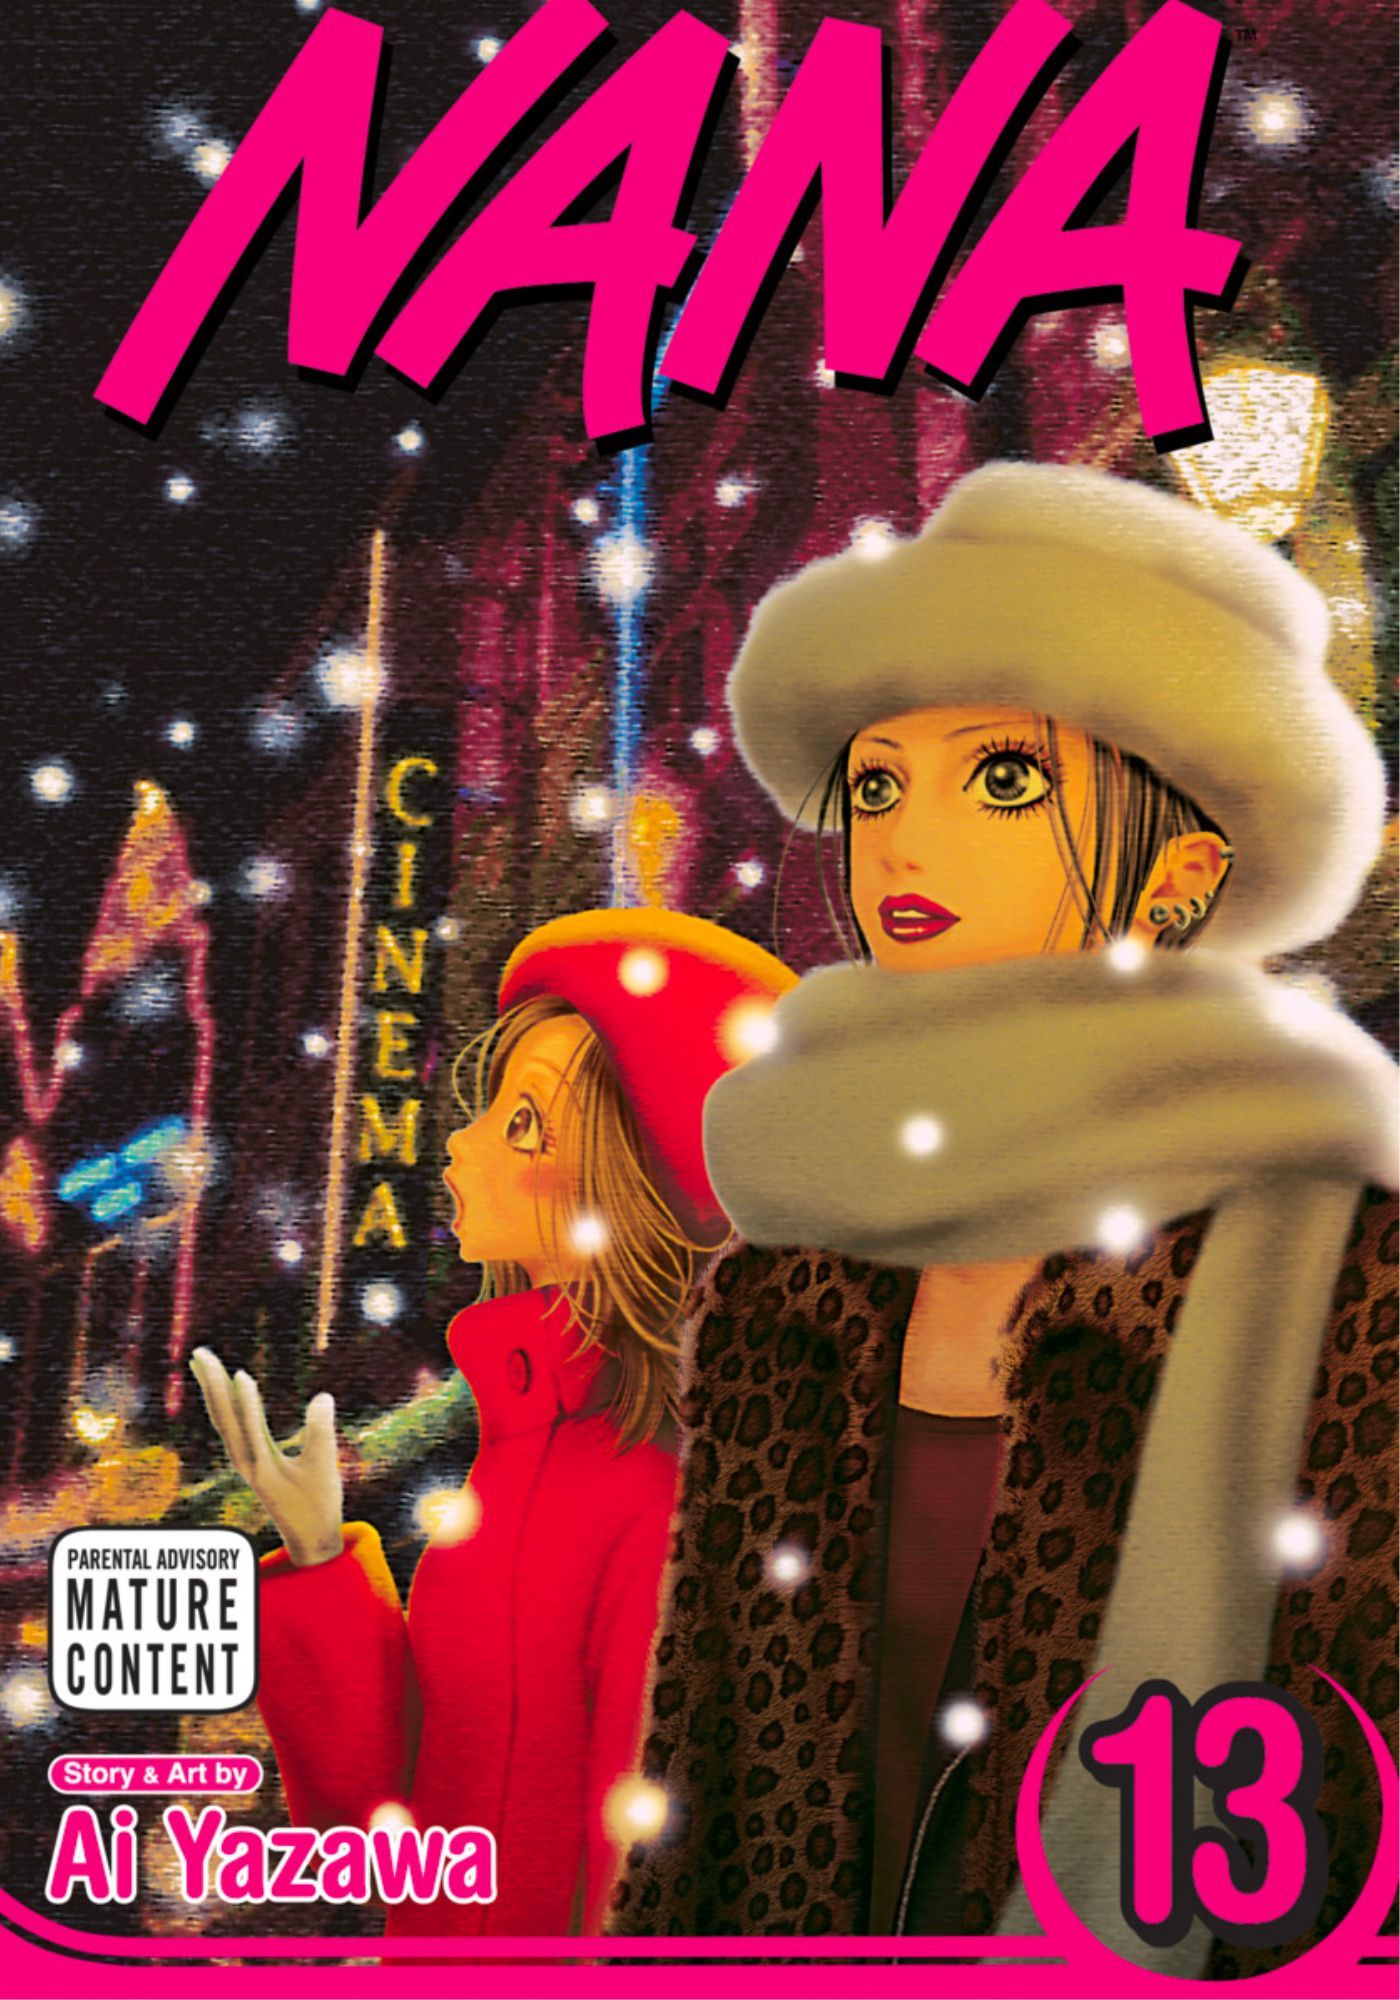 Nana volume 13 cover art of Hachi and Nana standing outside of a movie theater, looking out at the snow.